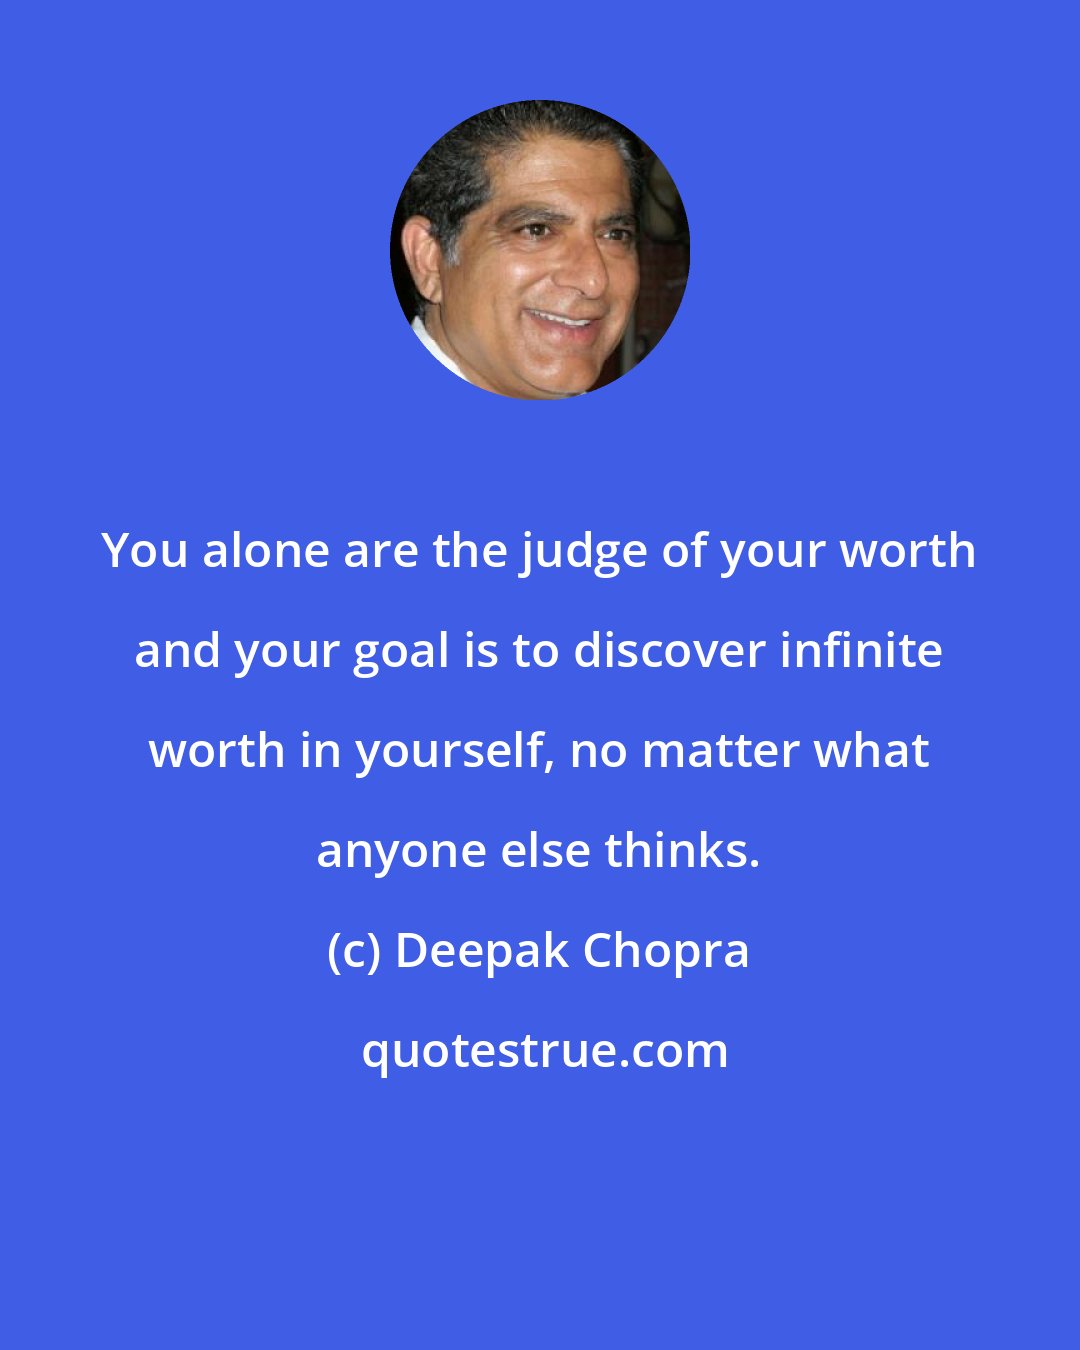 Deepak Chopra: You alone are the judge of your worth and your goal is to discover infinite worth in yourself, no matter what anyone else thinks.